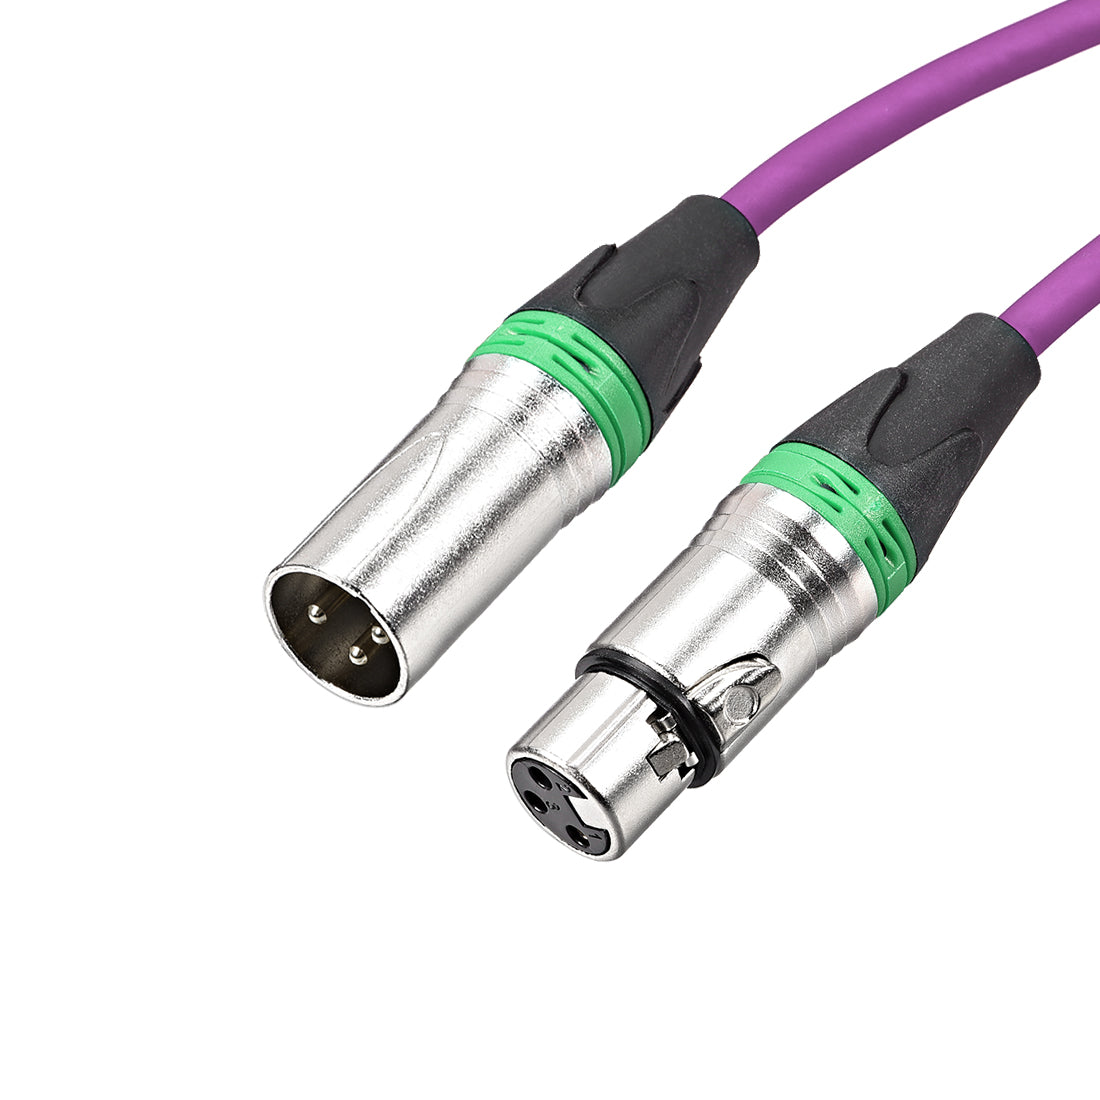 uxcell Uxcell XLR Male to XLR Female Cable Line for Microphone Video Camera Sound Card Mixer Green Silver Tone XLR Purple Line 0.5M 1.64ft